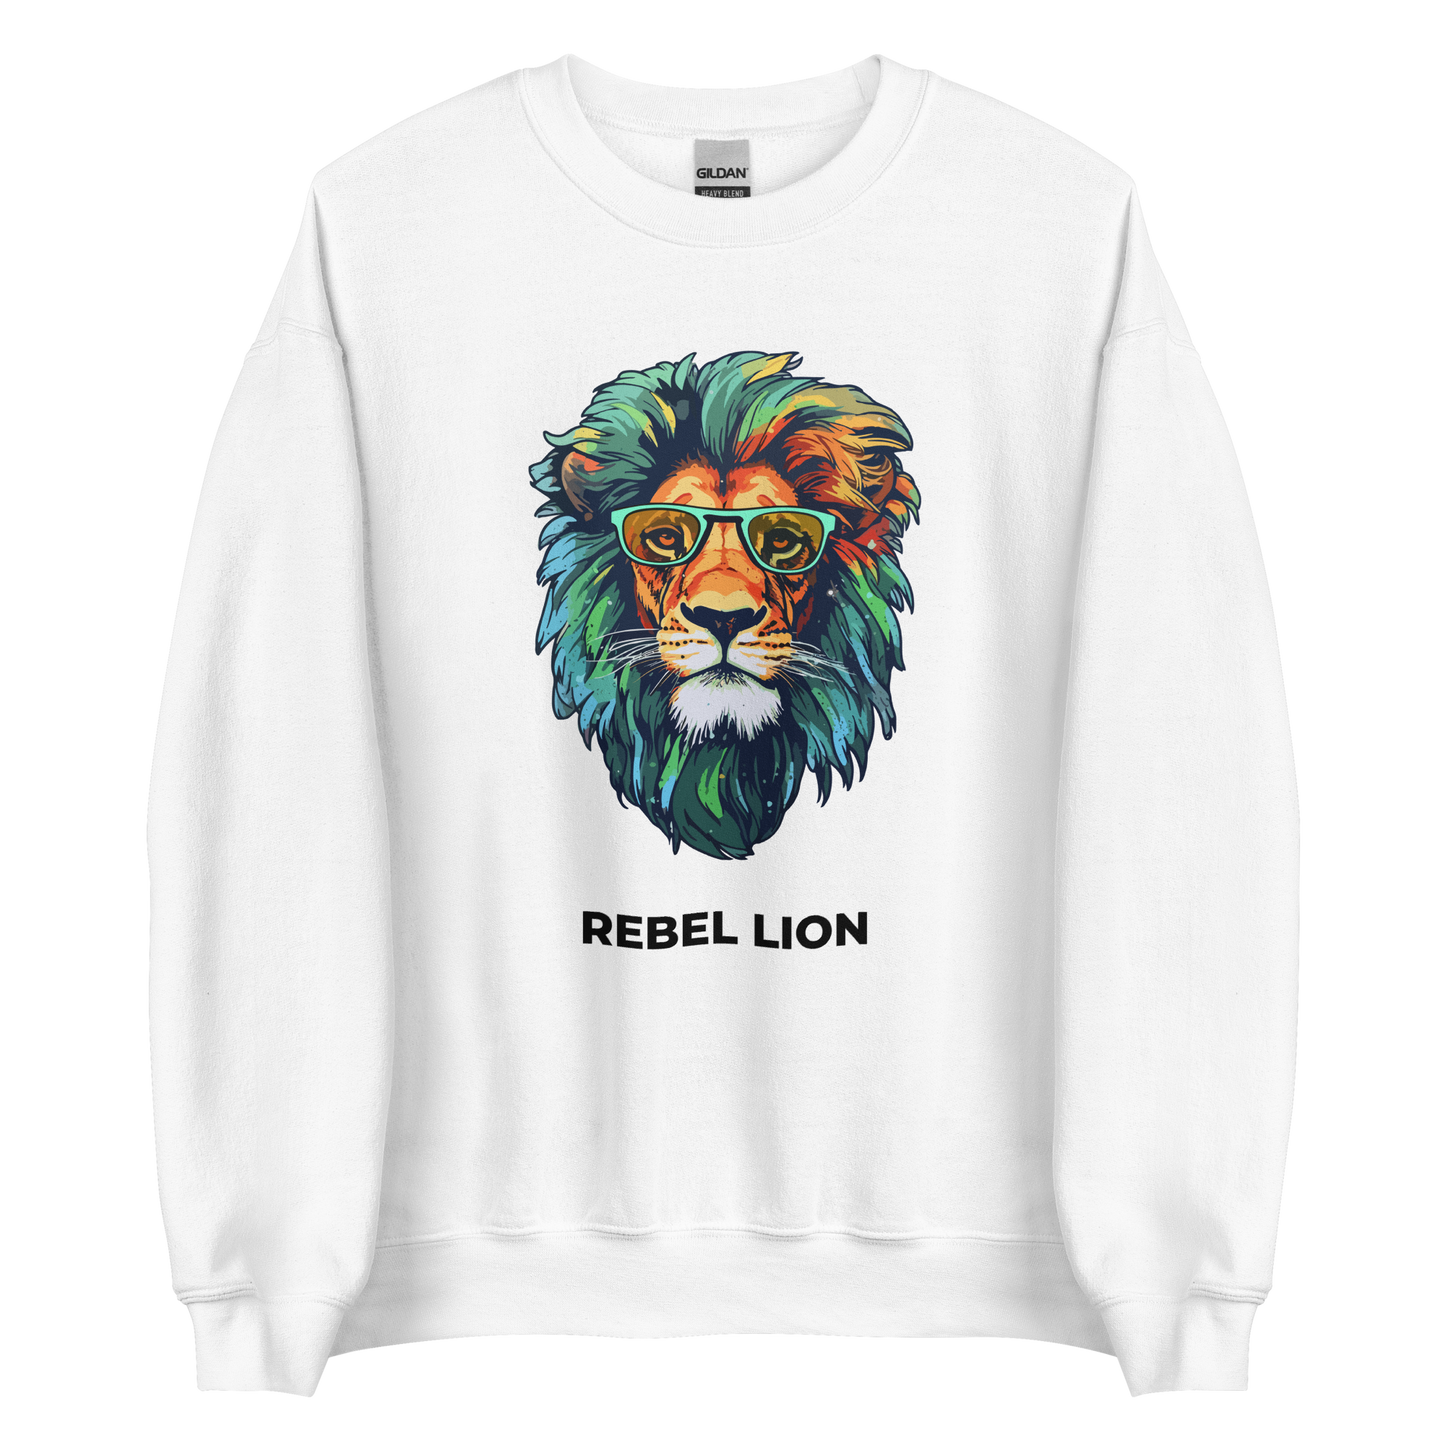 White Lion Sweatshirt featuring a captivating Rebel Lion graphic on the chest - Funny Graphic Lion Sweatshirts - Boozy Fox